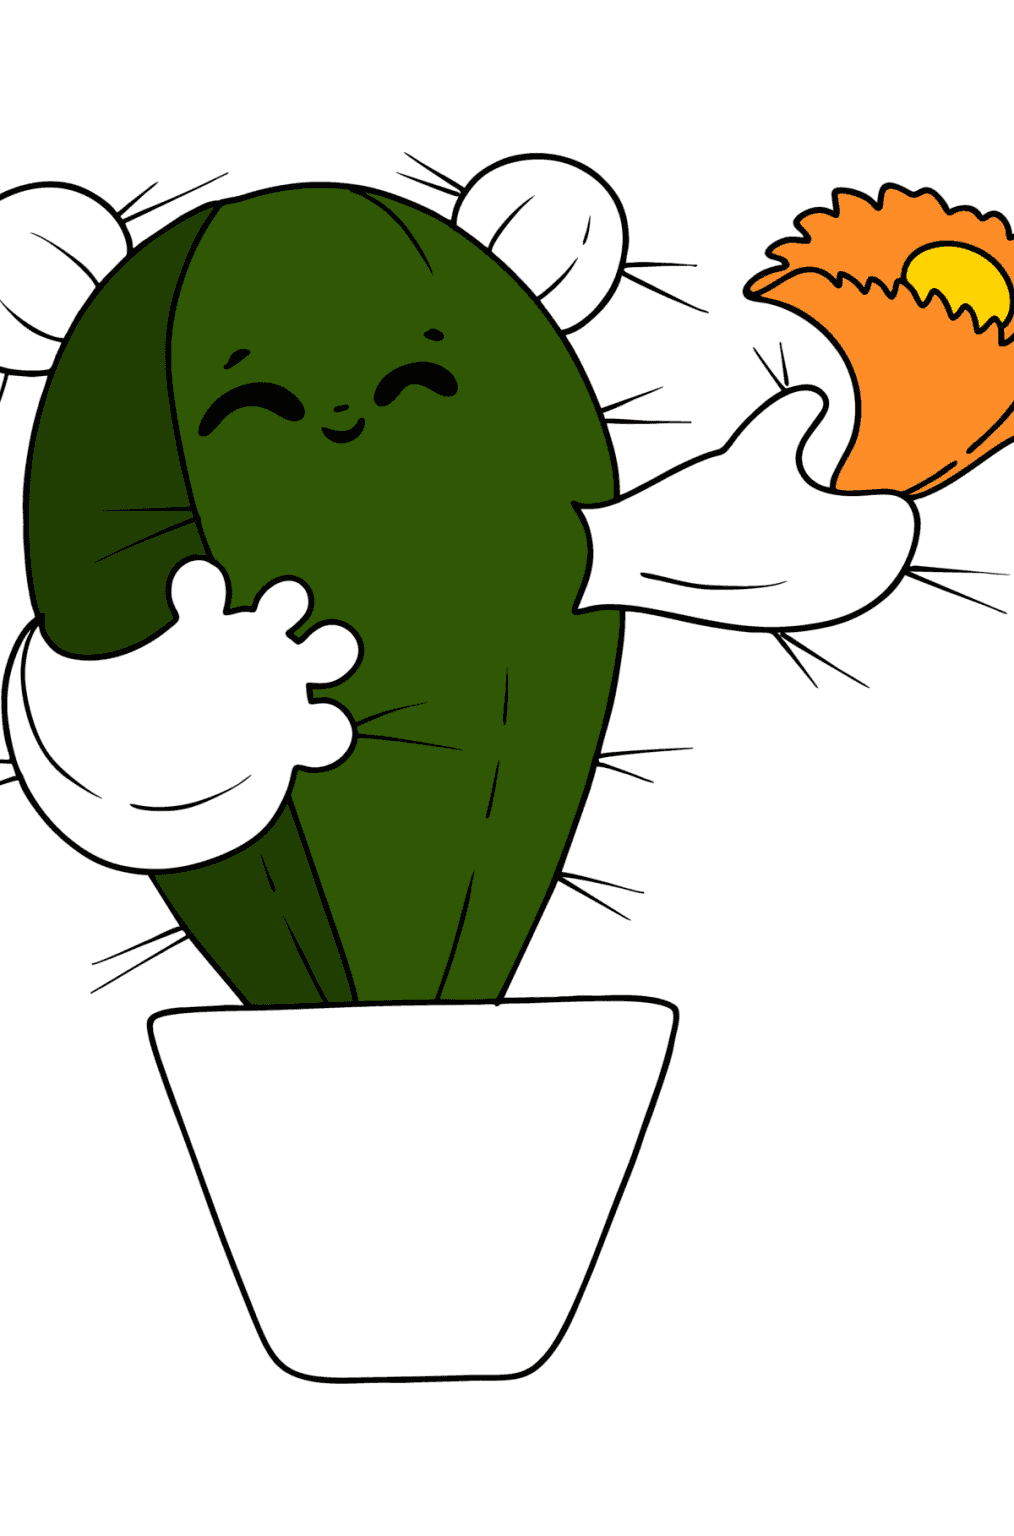 cactus-girl-coloring-page-online-and-print-for-free